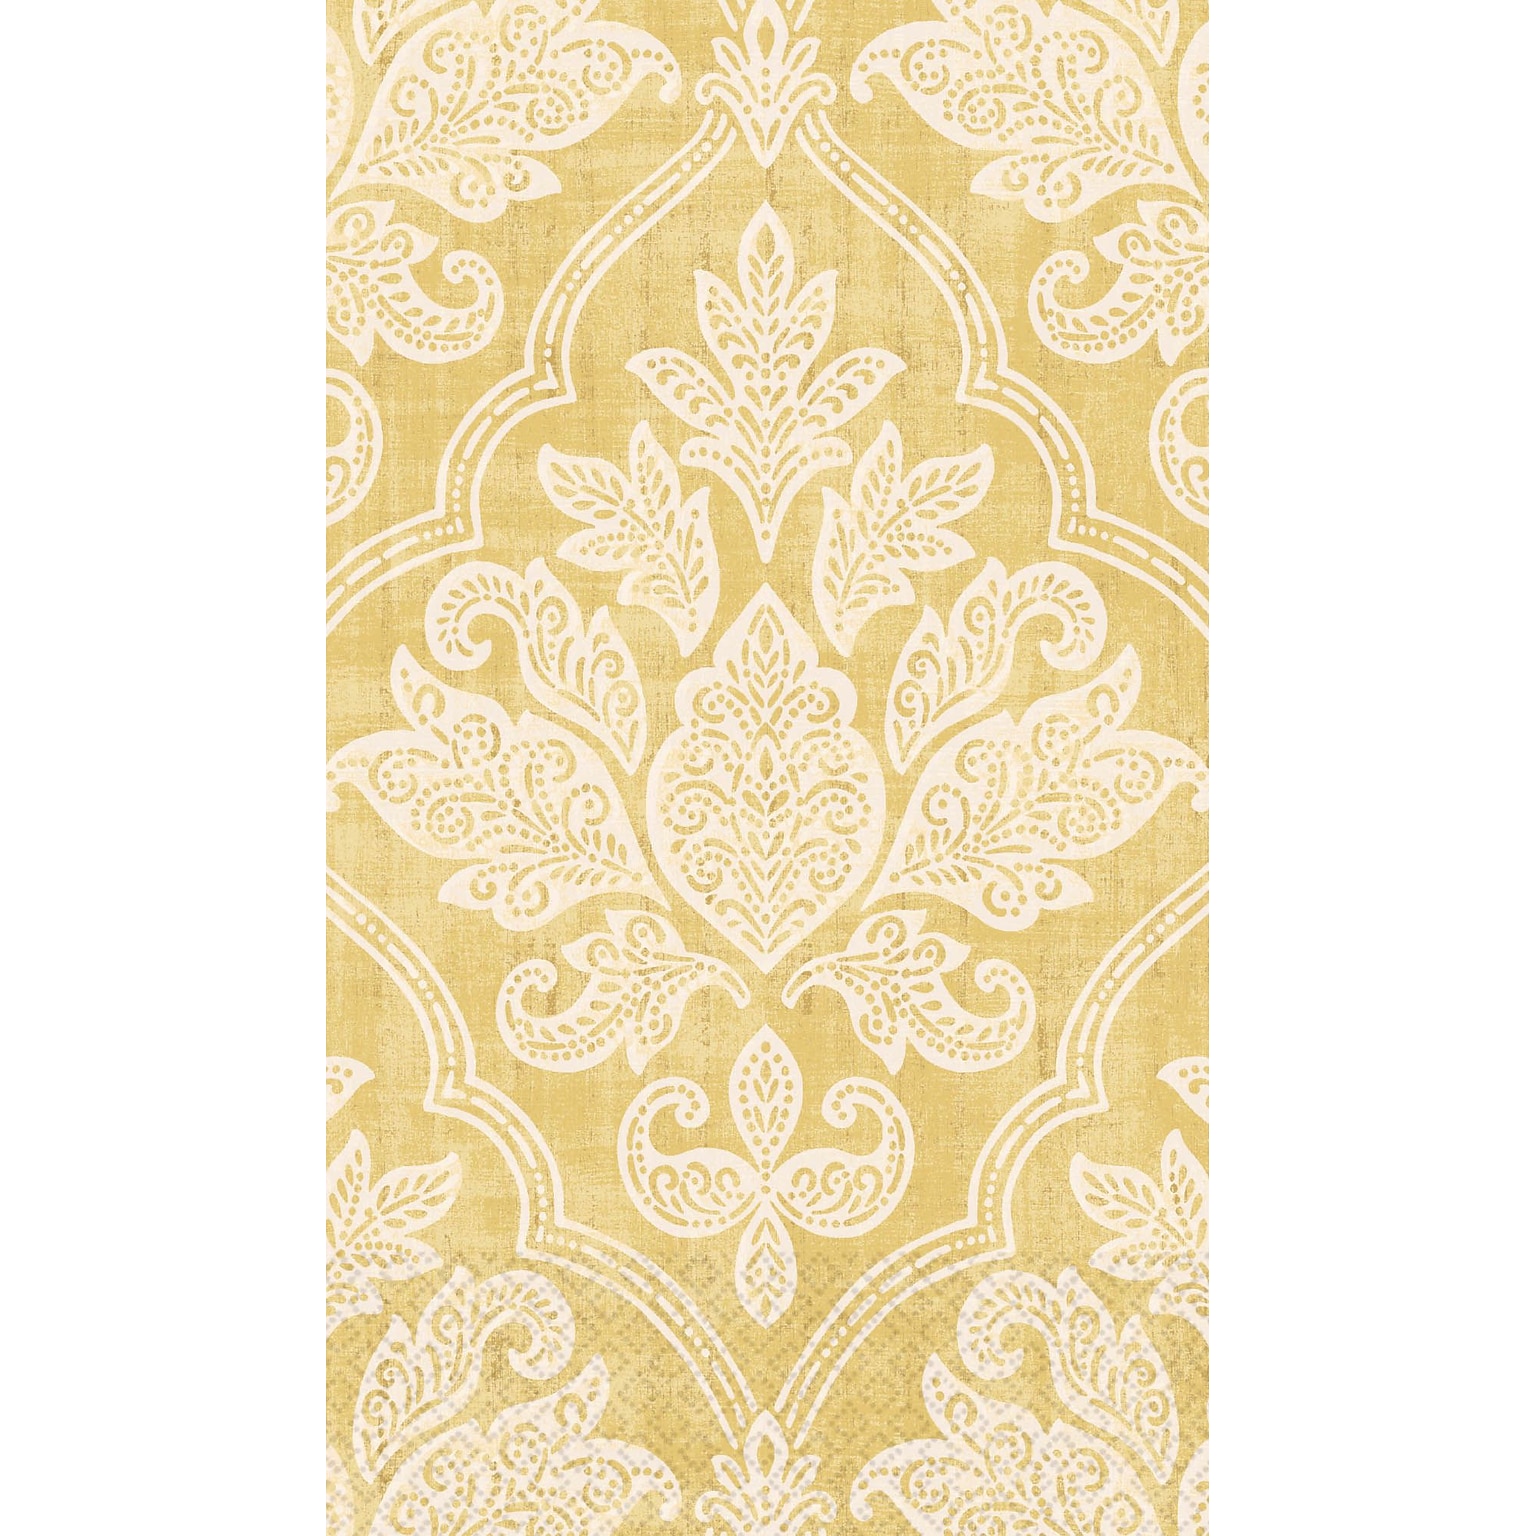 Amscan Gold Damask Guest Towels, 7.75 x 4.5, 4/Pack, 16 Per Pack (530008)